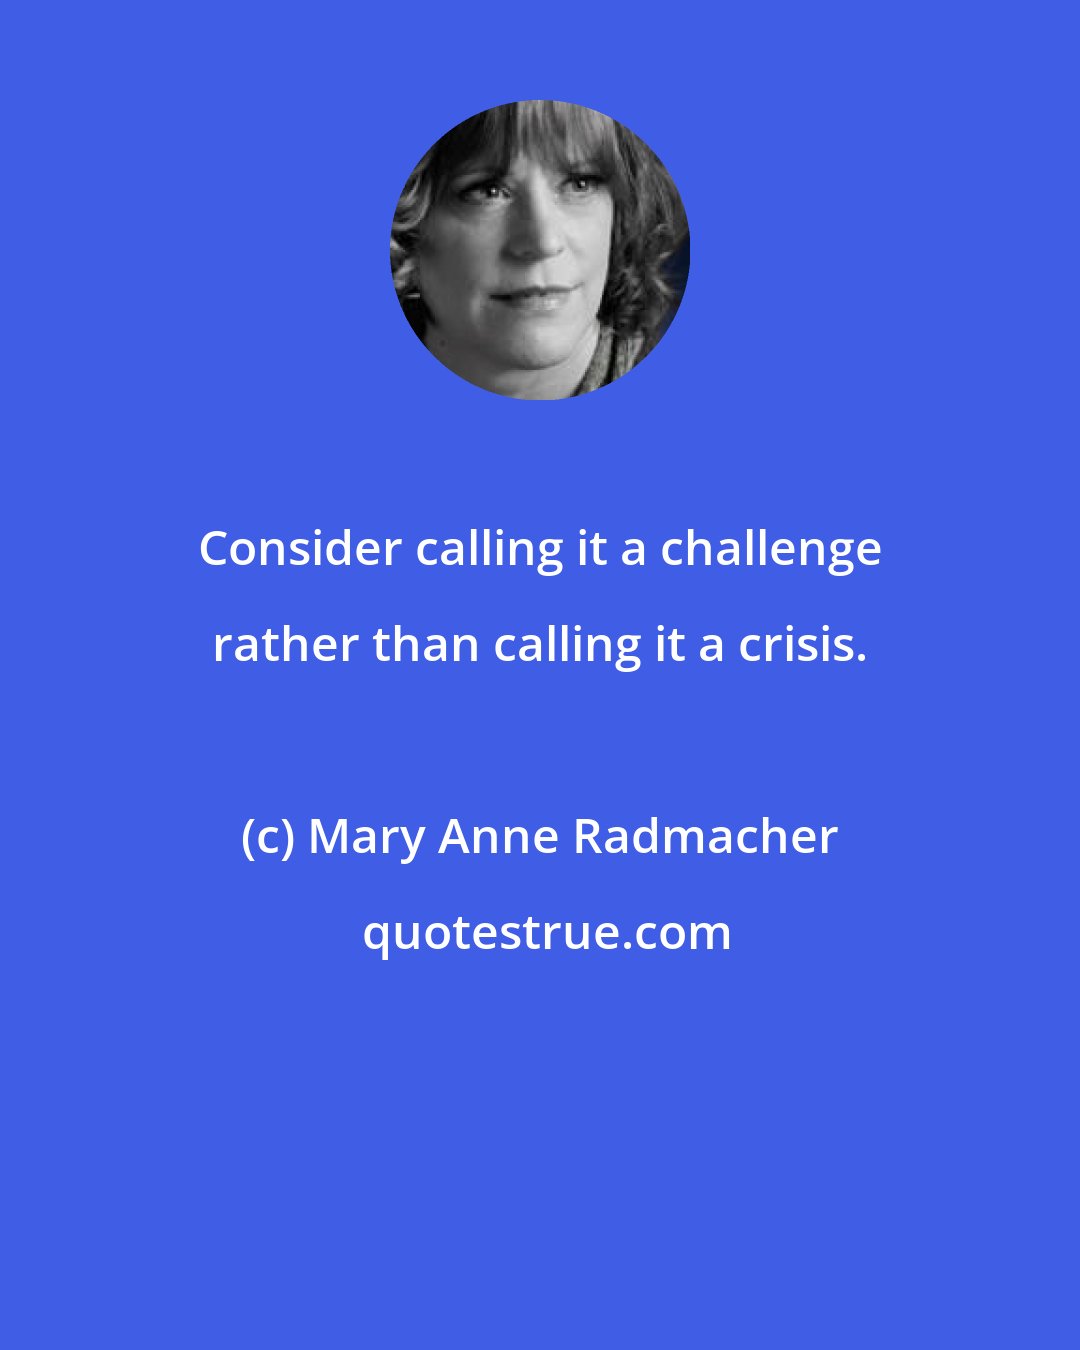 Mary Anne Radmacher: Consider calling it a challenge rather than calling it a crisis.